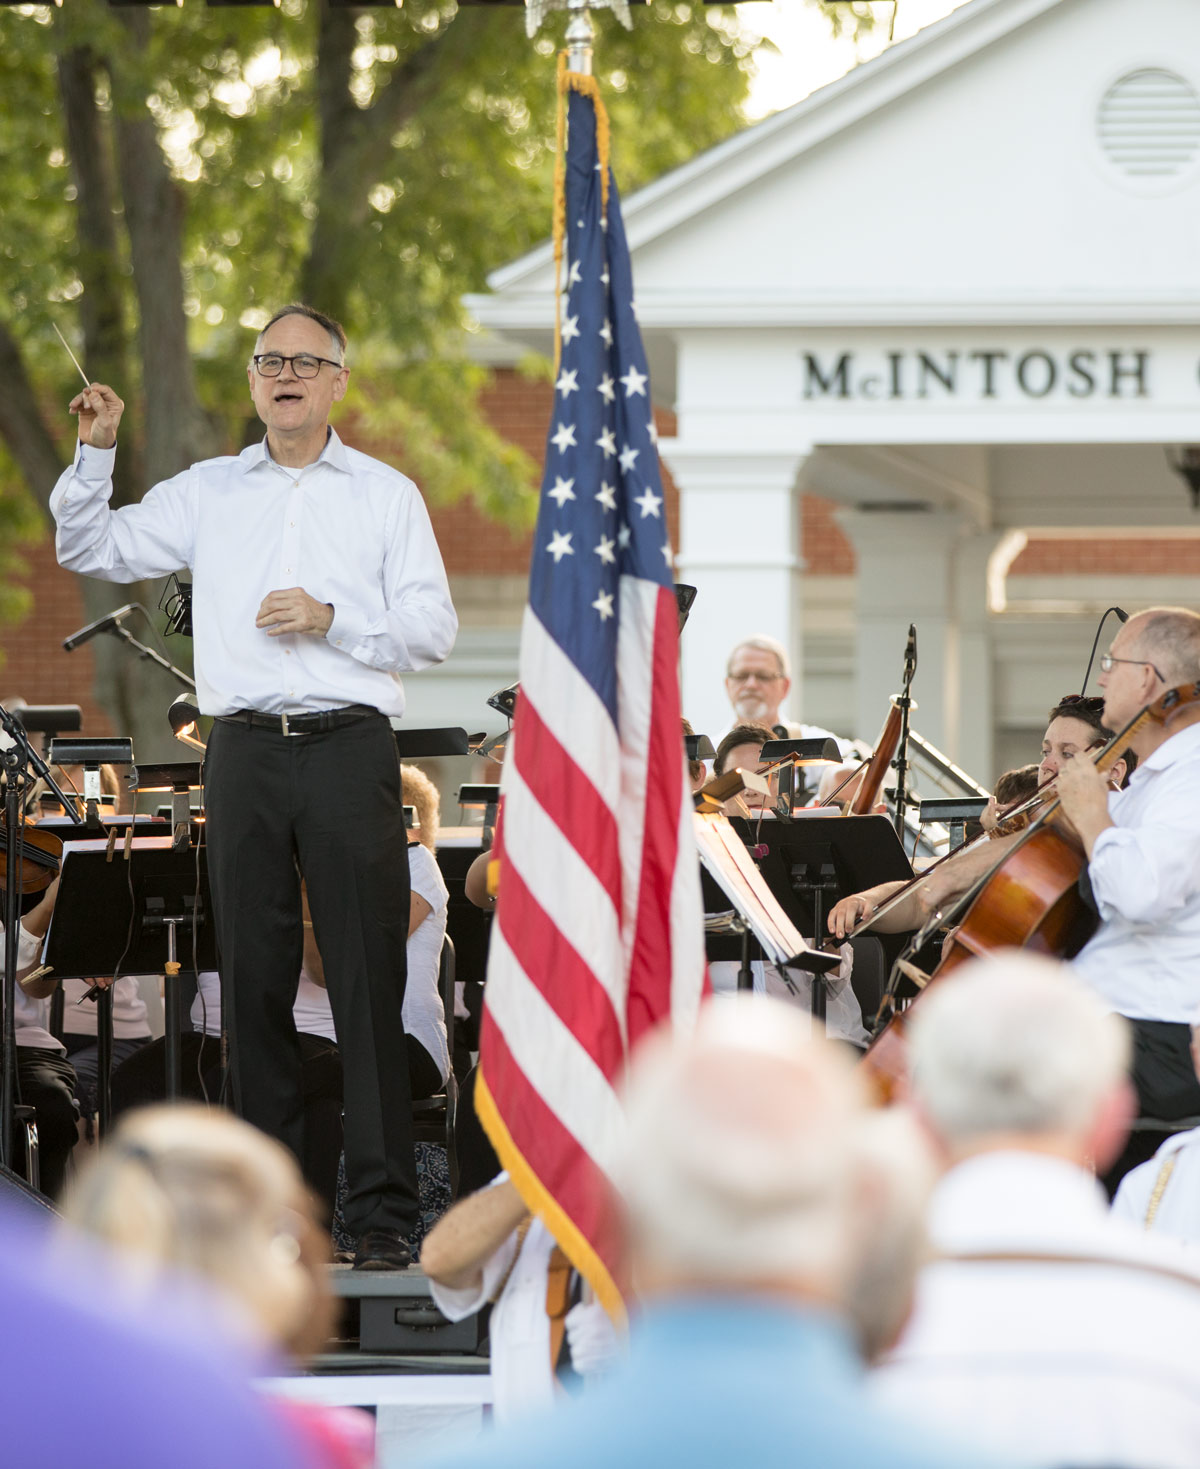 The Lima Symphony Orchestra played a “Patriotic Pops” concert outside of McIntosh Center on the campus of Ohio Northern University. 